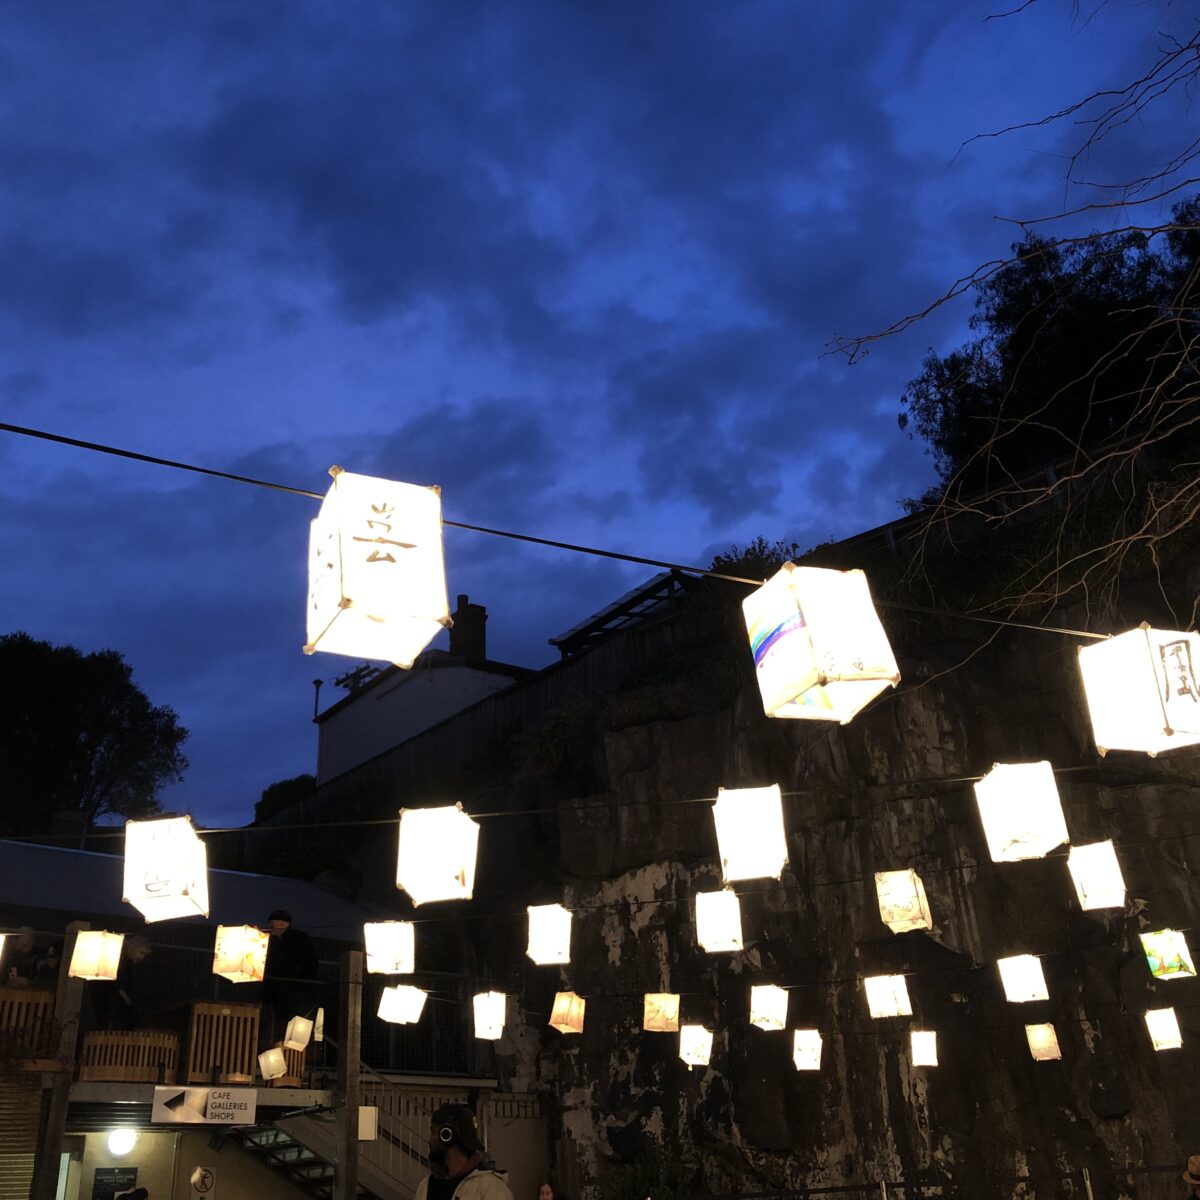 Beautiful paper lanterns are hung in The outside Courtyard. There is a dark blue moody sky behind them.